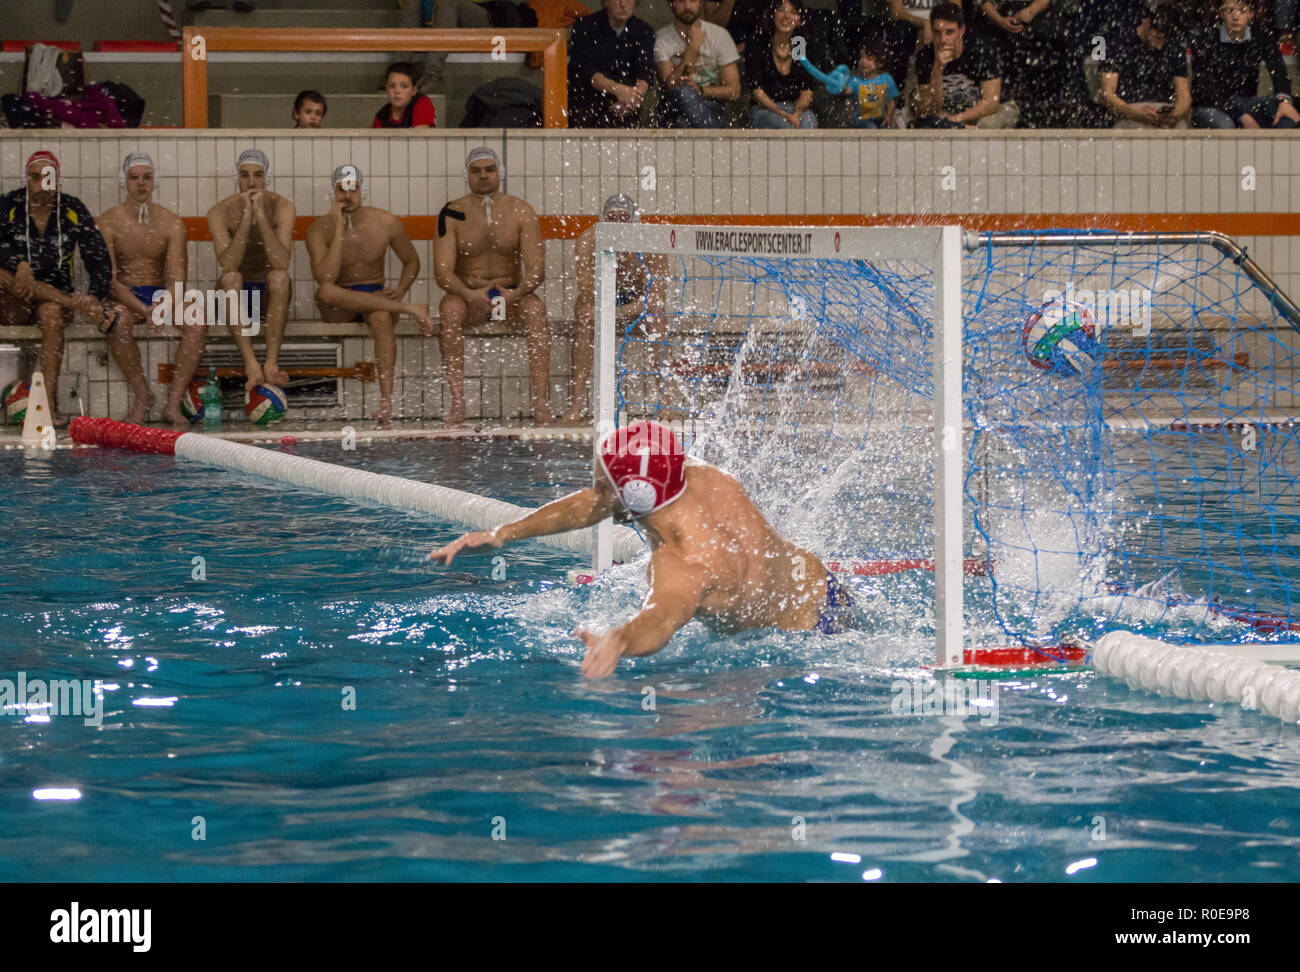 Goalkeeper during an actions - A series of shots depicting water polo players,.Game actions, attack, defense and goal. Stock Photo